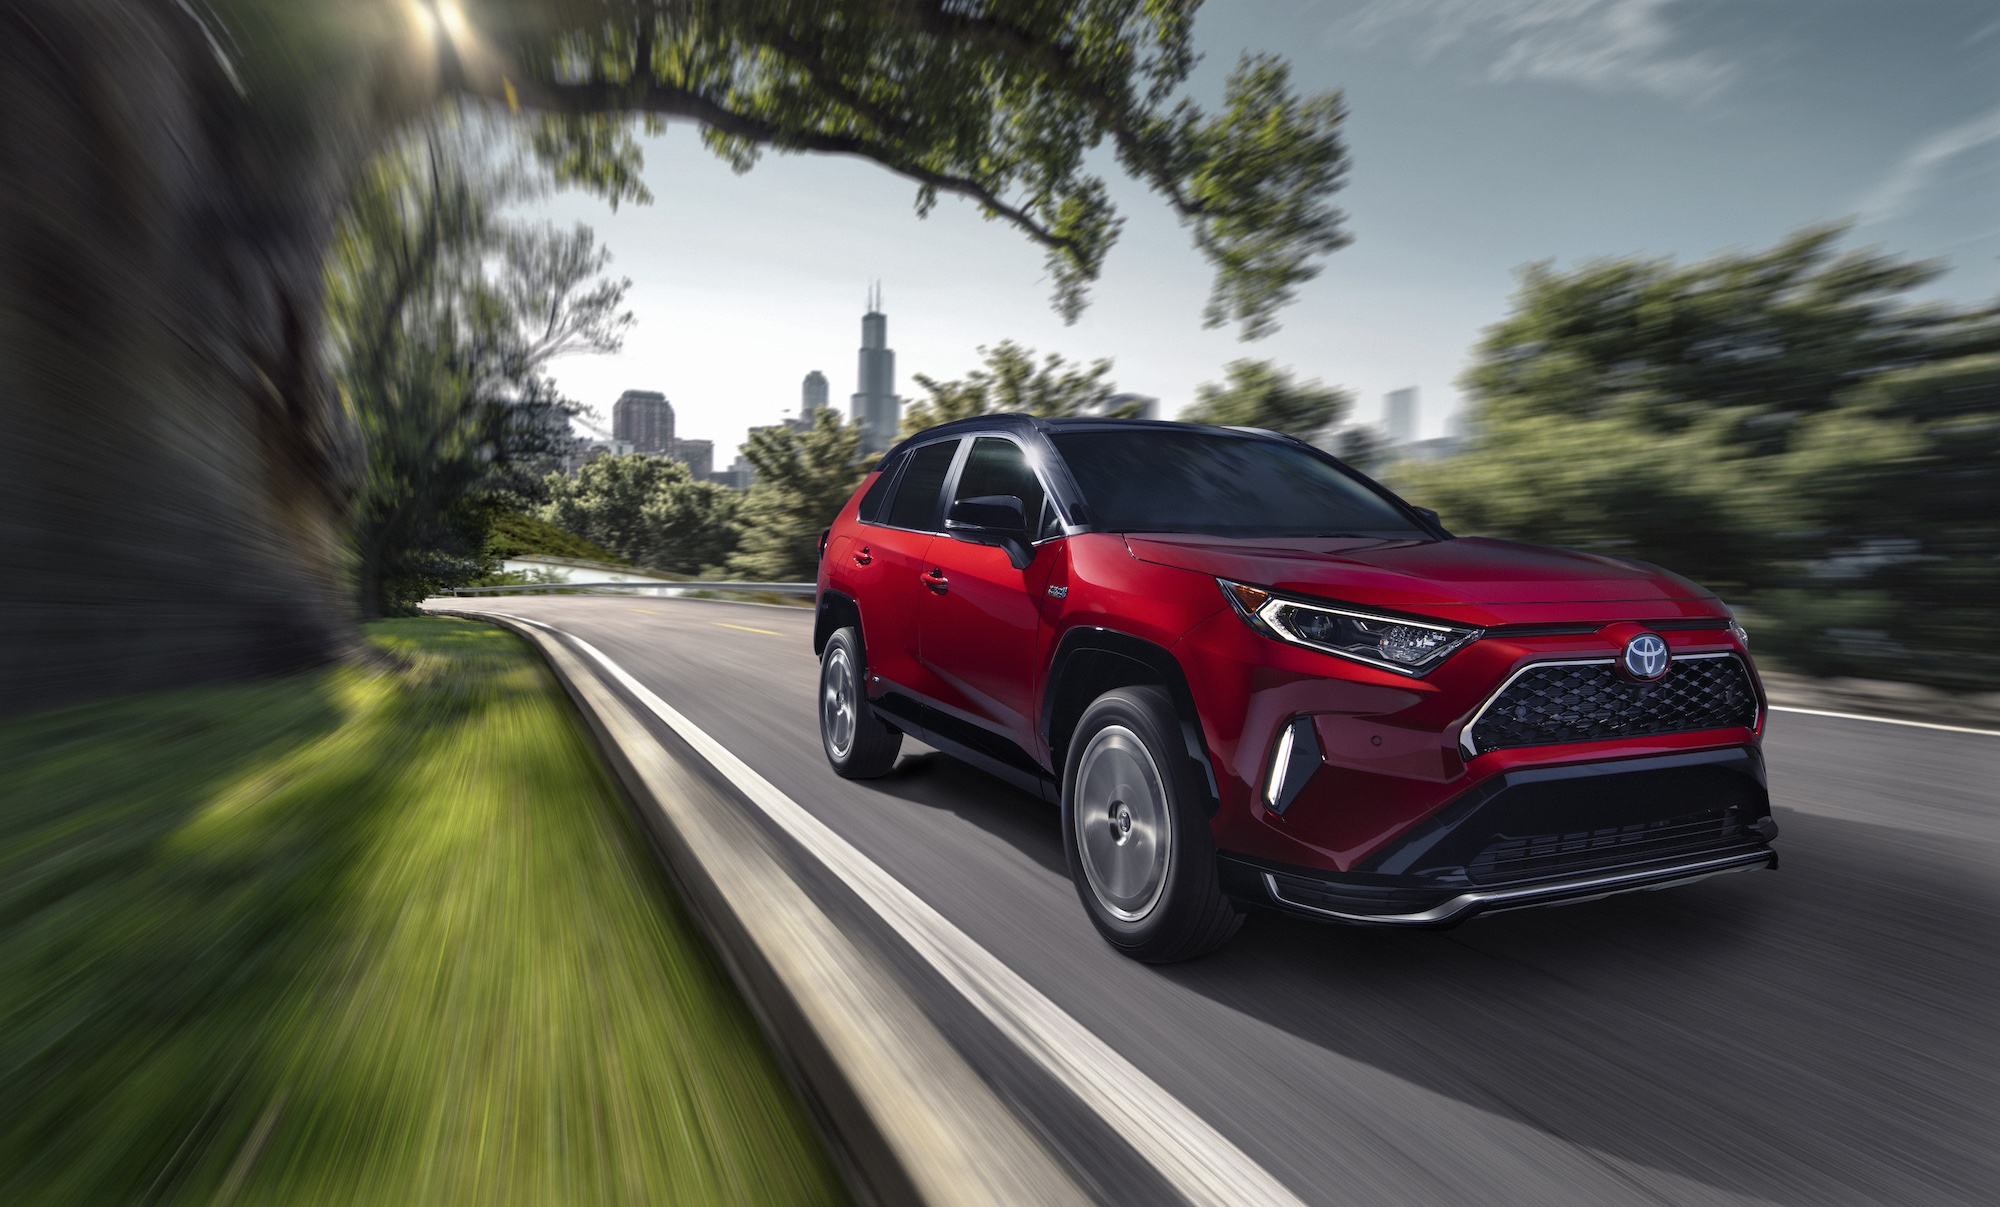 A red 2021 Toyota RAV4 Prime plug-in hybrid compact SUV traveling on a road away from a city